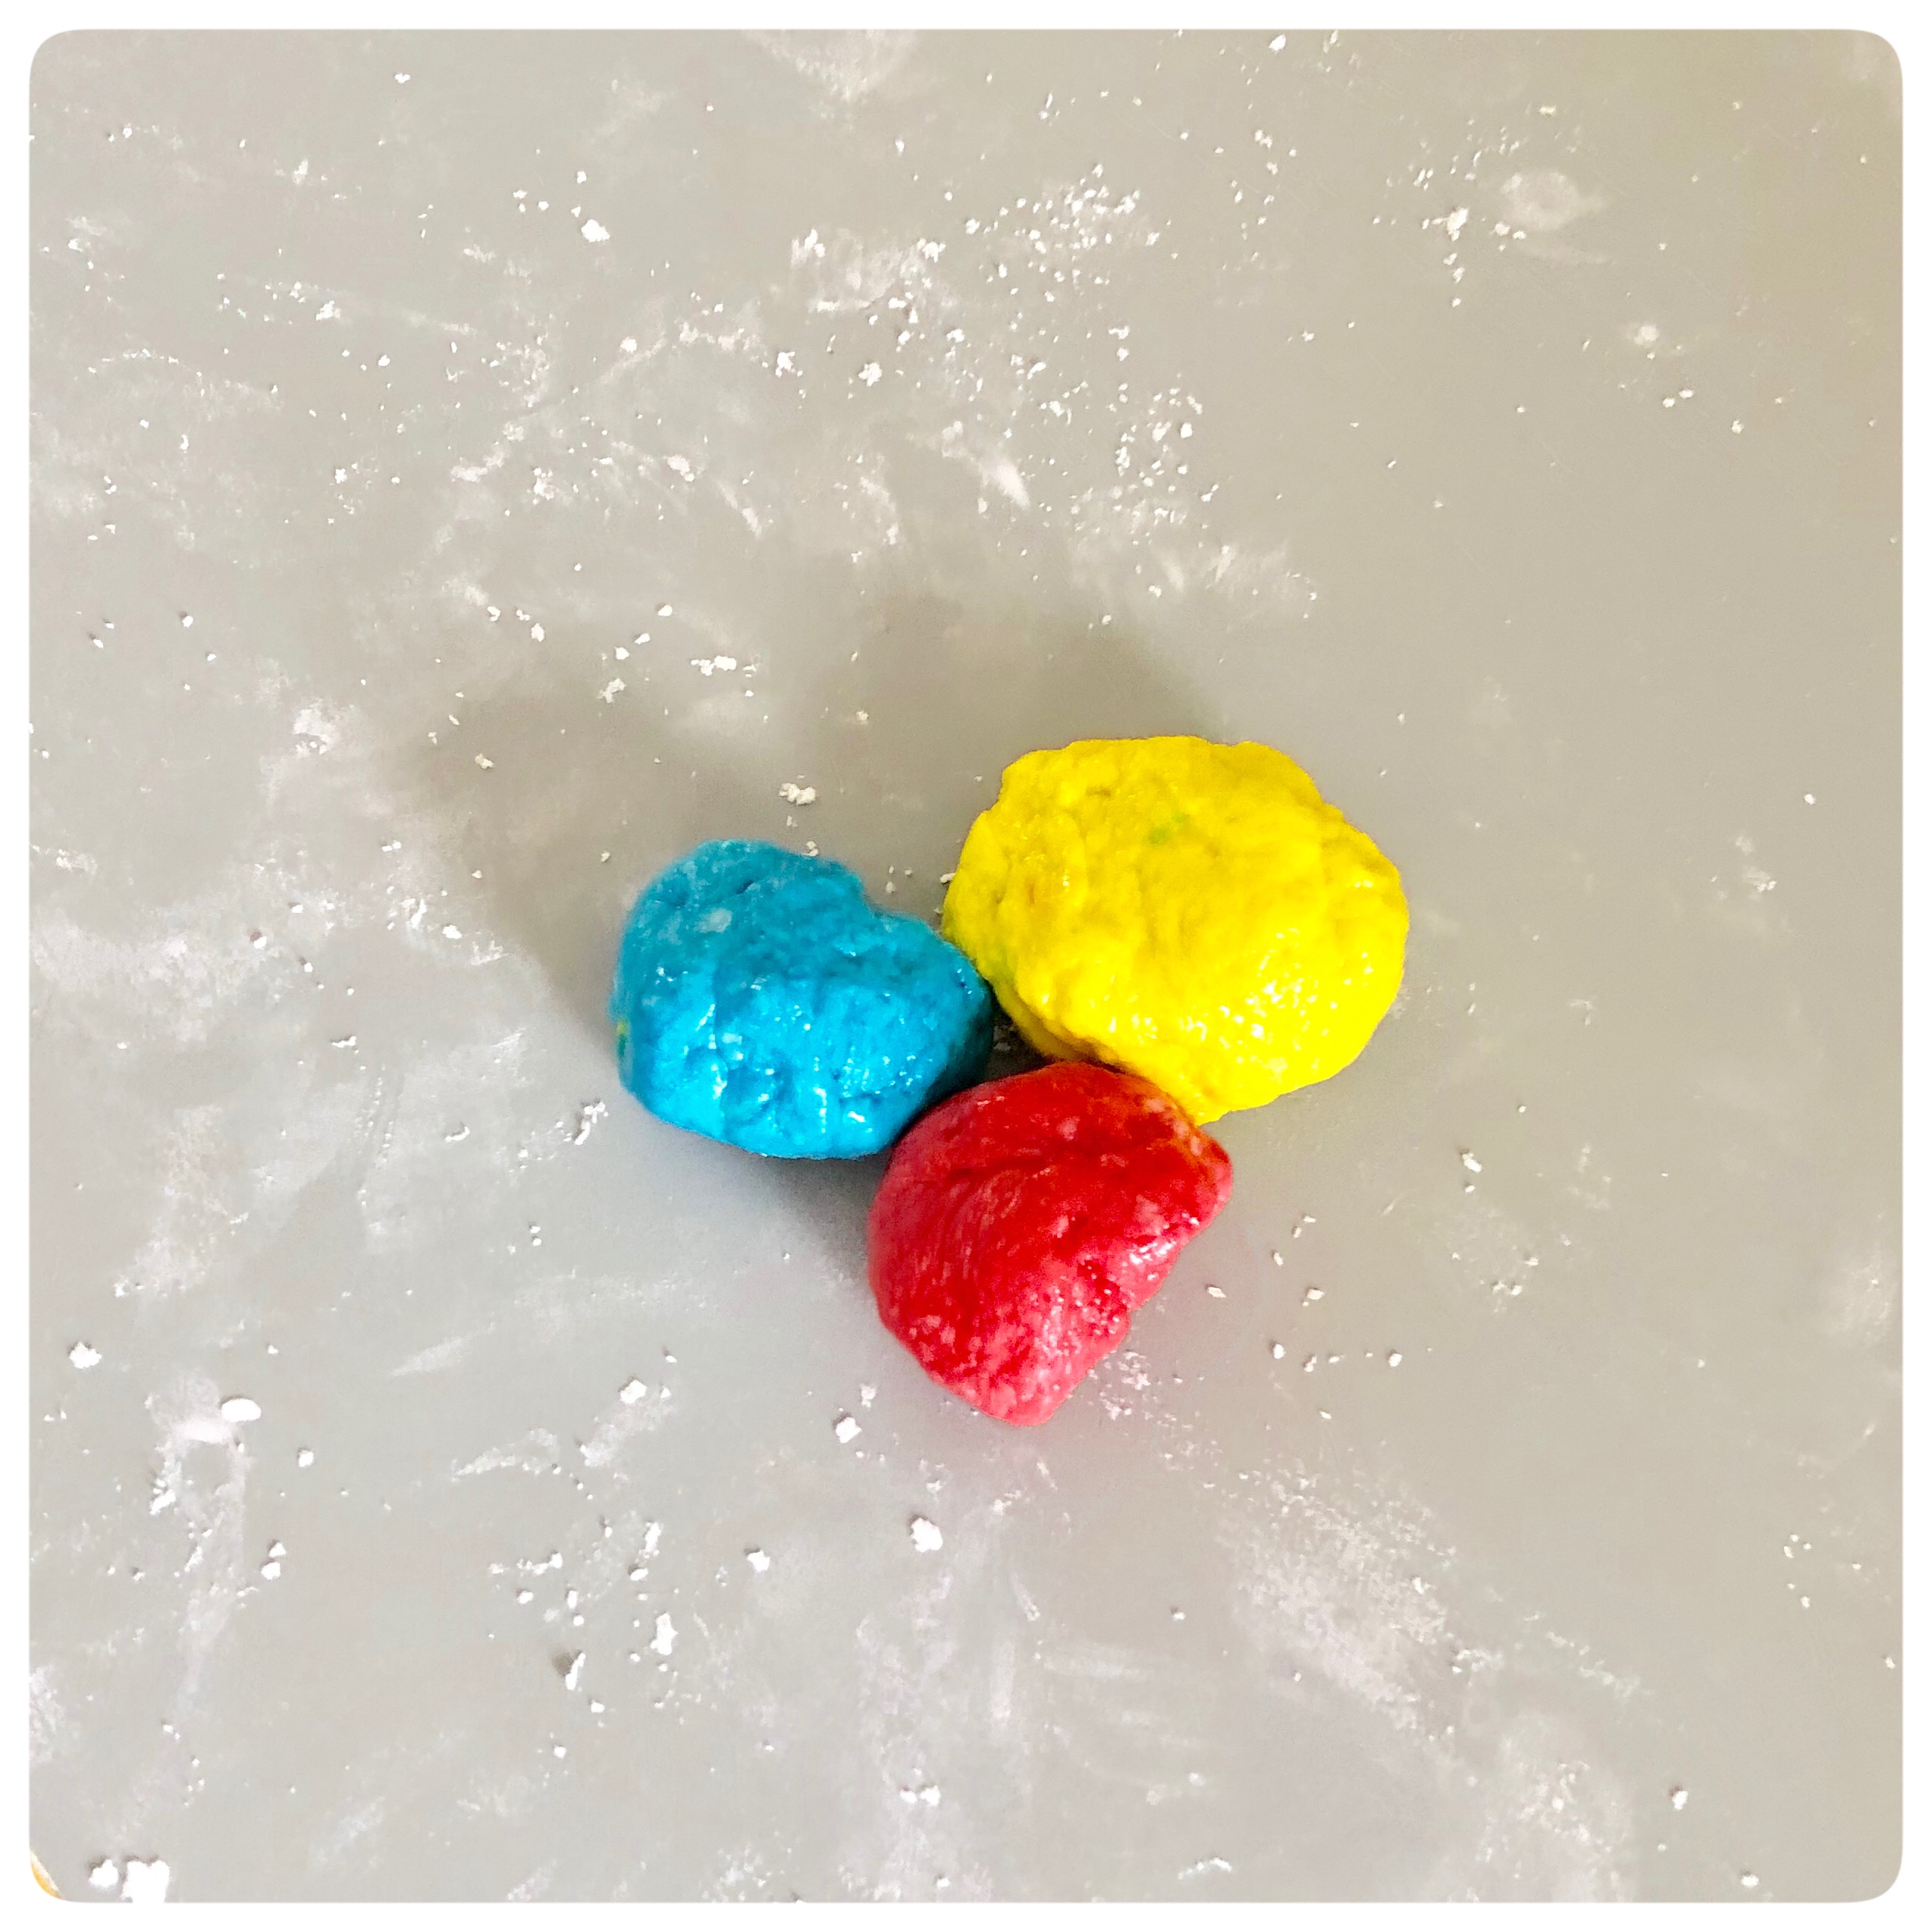 Edible Playdough: Creating interactive sensory activity to learn about Primary and Secondary colors